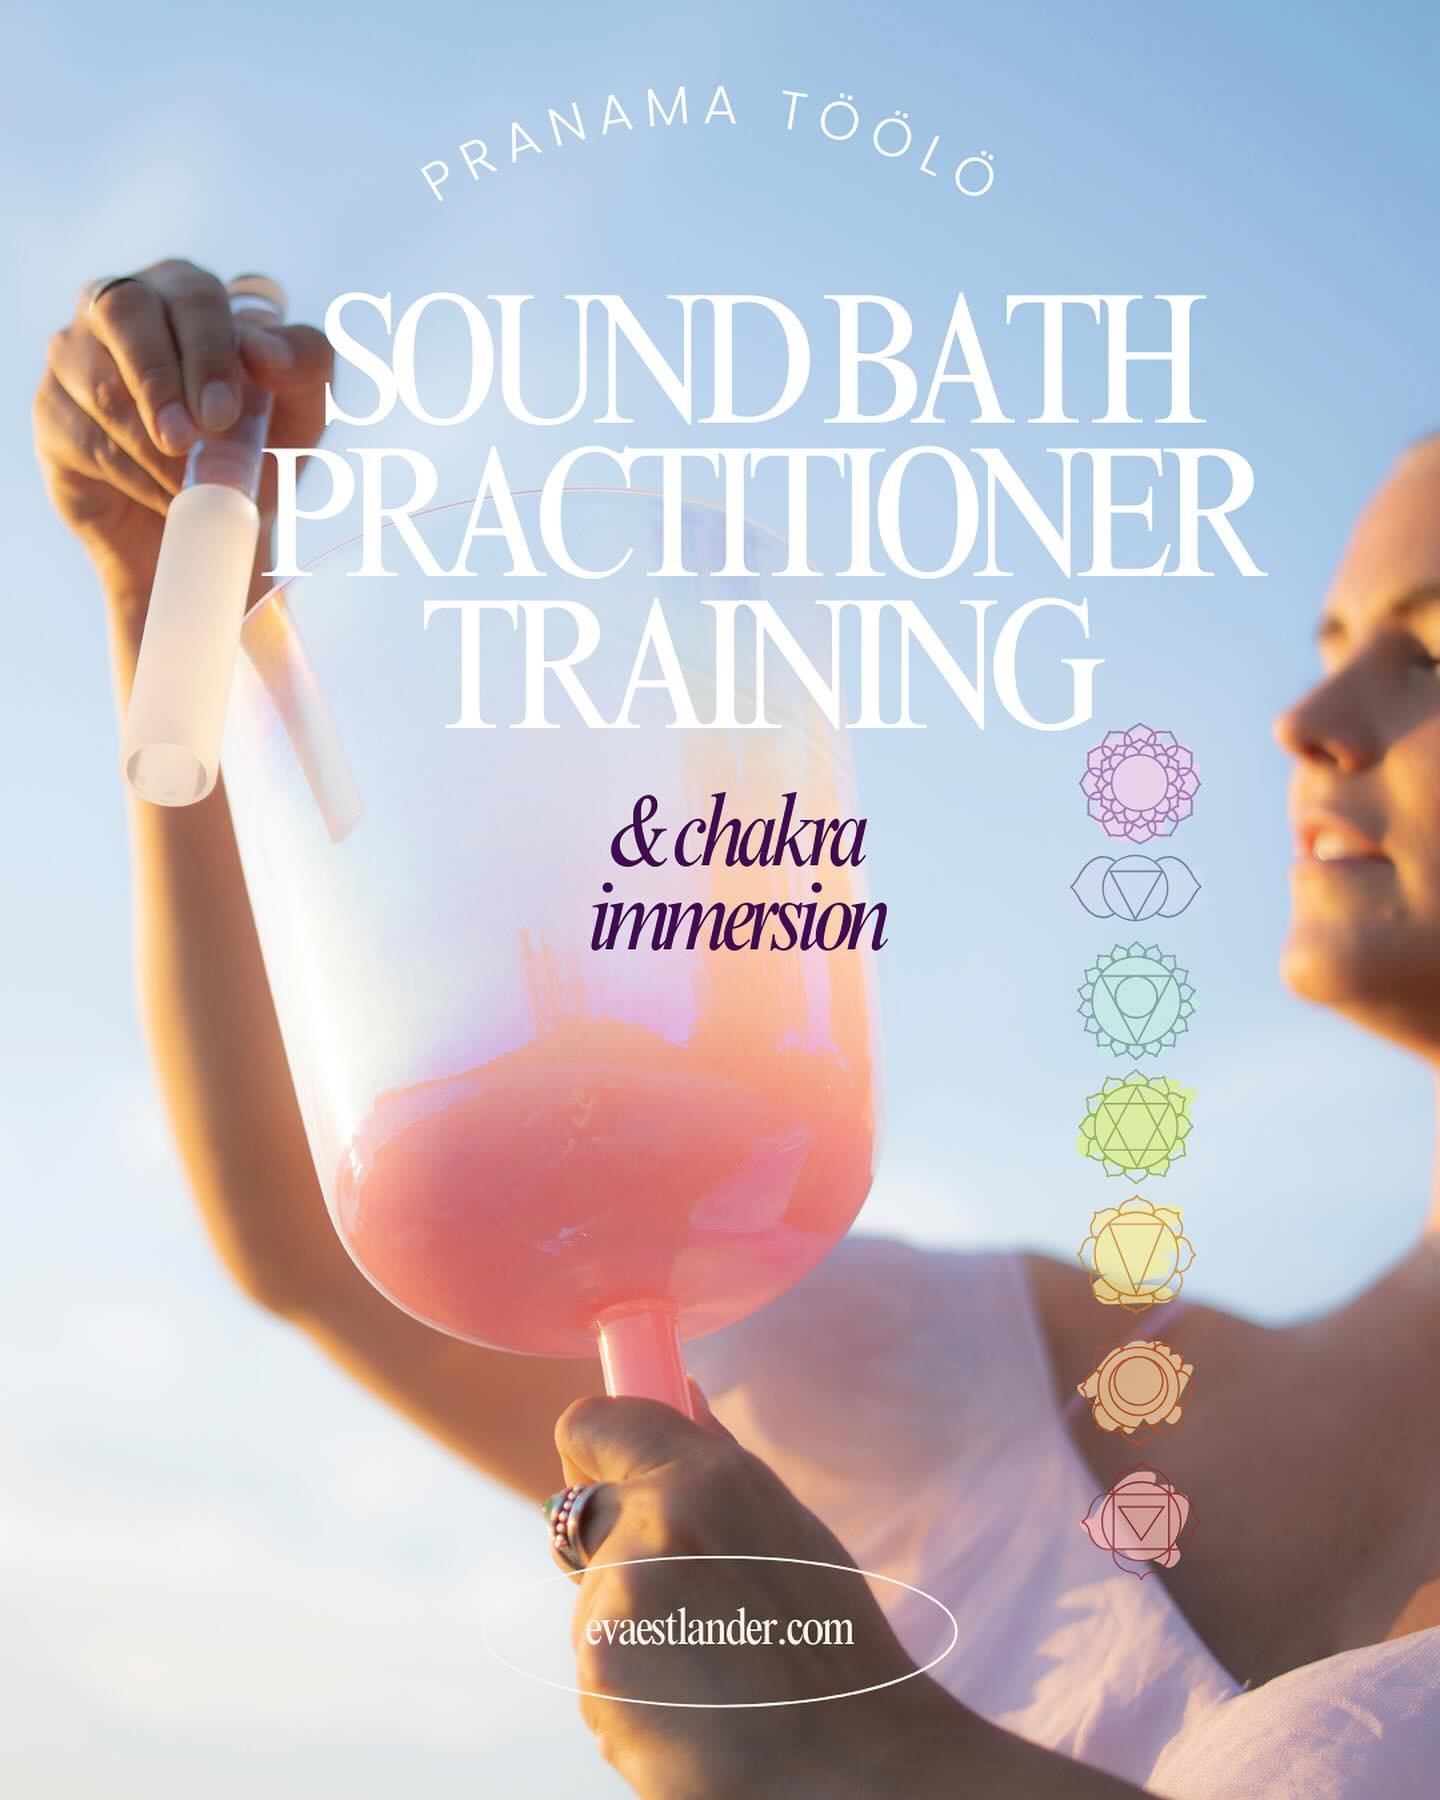 ✨SOUND BATH PRACTITIONER TRAINING ✨ Sept 21-22

💜Learn the basics of being a sound bath facilitator and dive deep into the subtle body in this weekend training at the new studio of @pranamahelsinki in T&ouml;&ouml;l&ouml;

💜Please note spots are li